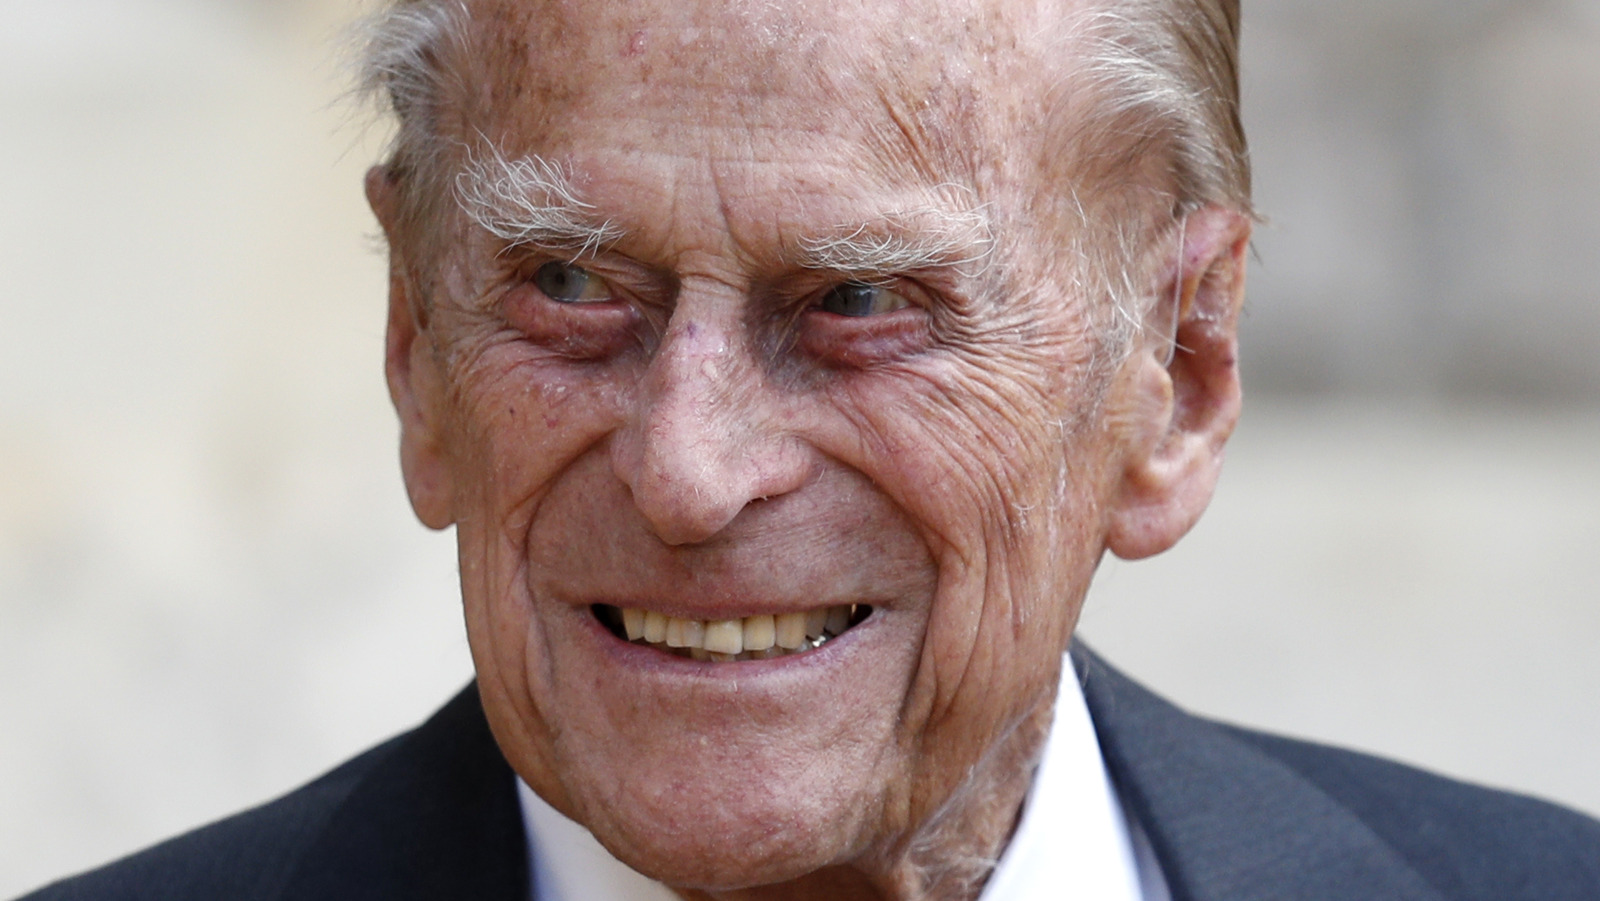 The Real Reason Prince Philip’s Will Is Going To Remain Sealed For 90 Years